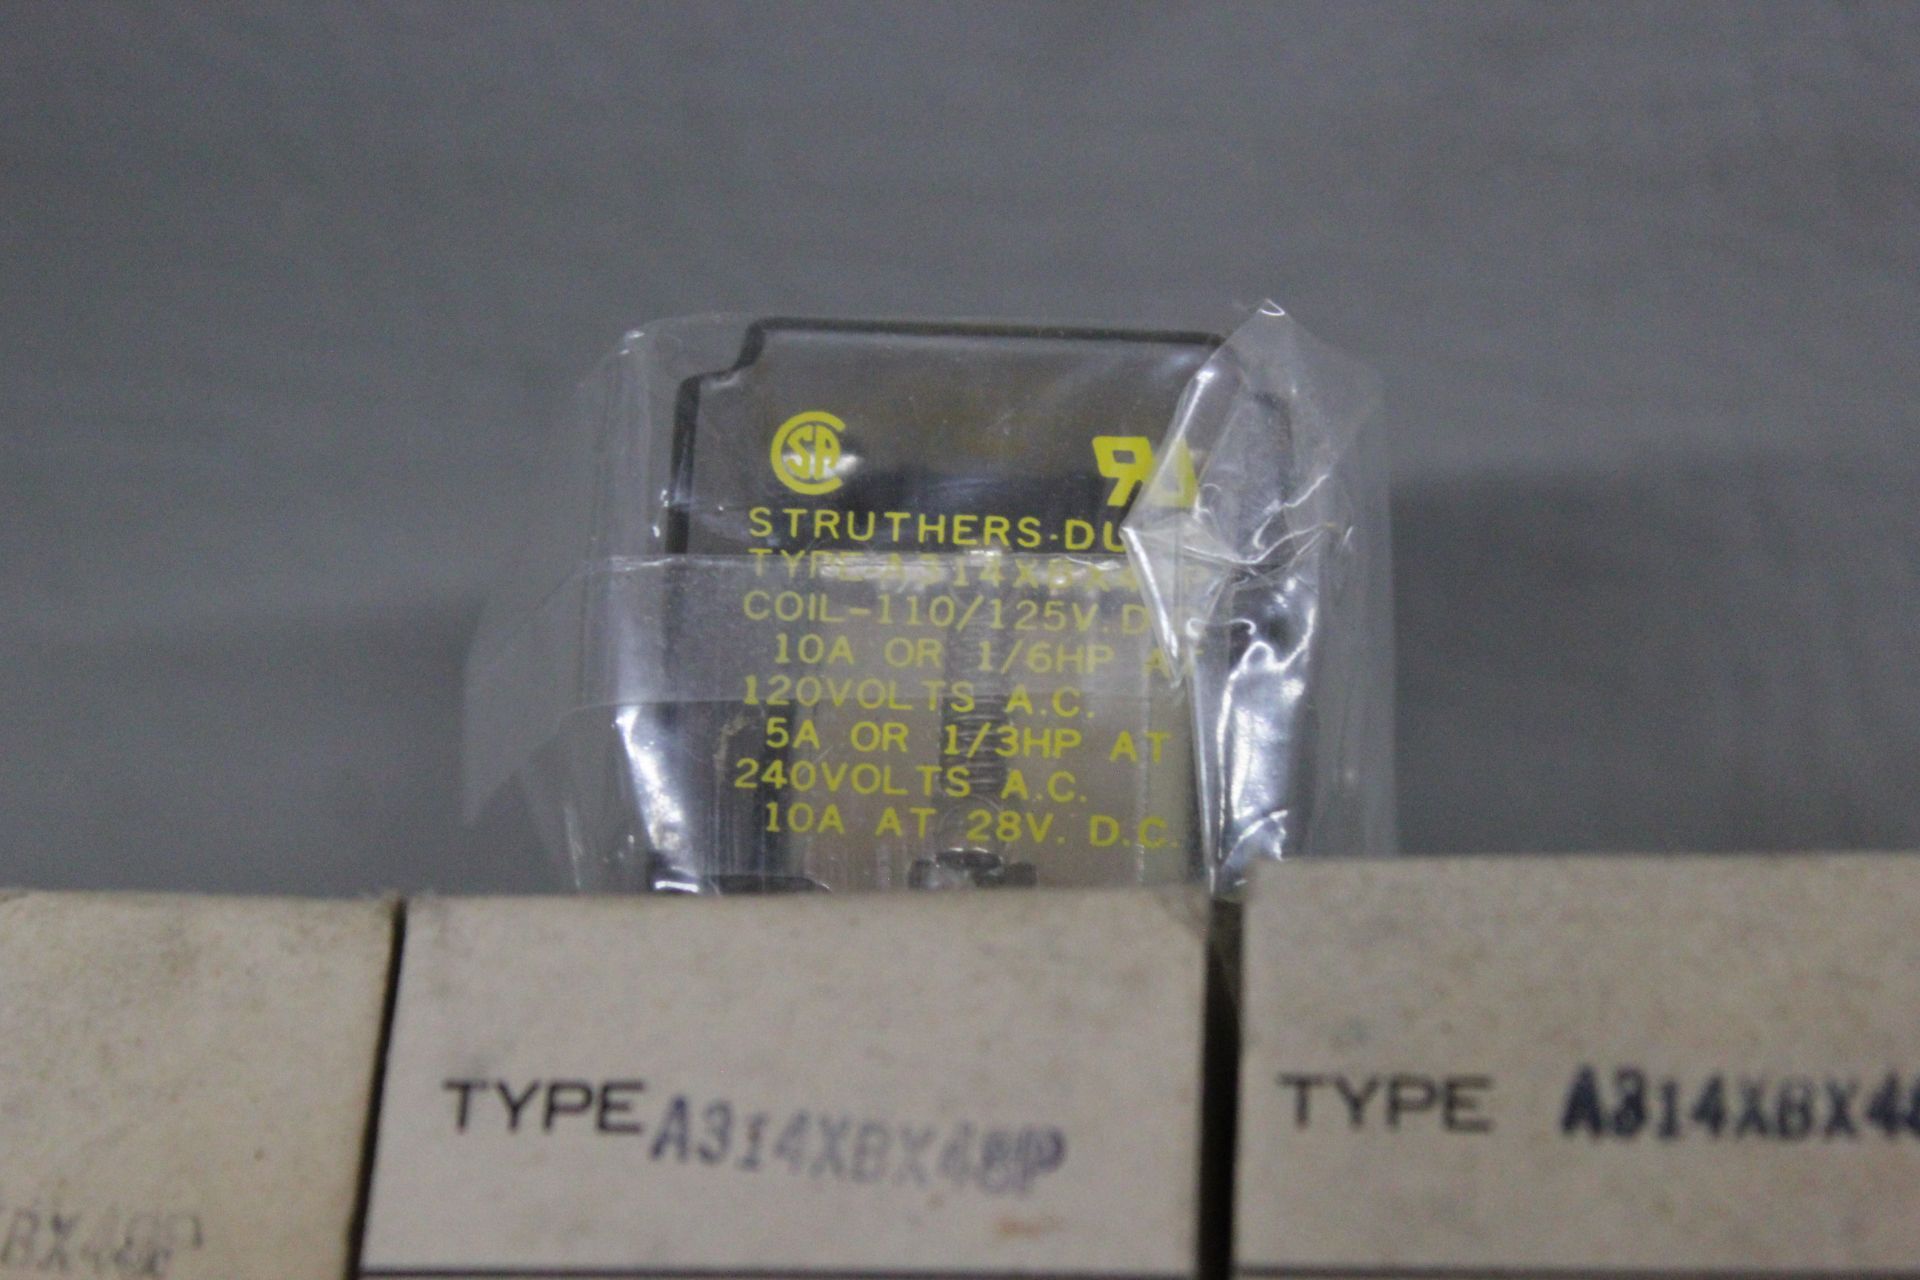 LOT OF NEW STRUTHERS DUNN 120VDC RELAYS - Image 5 of 6